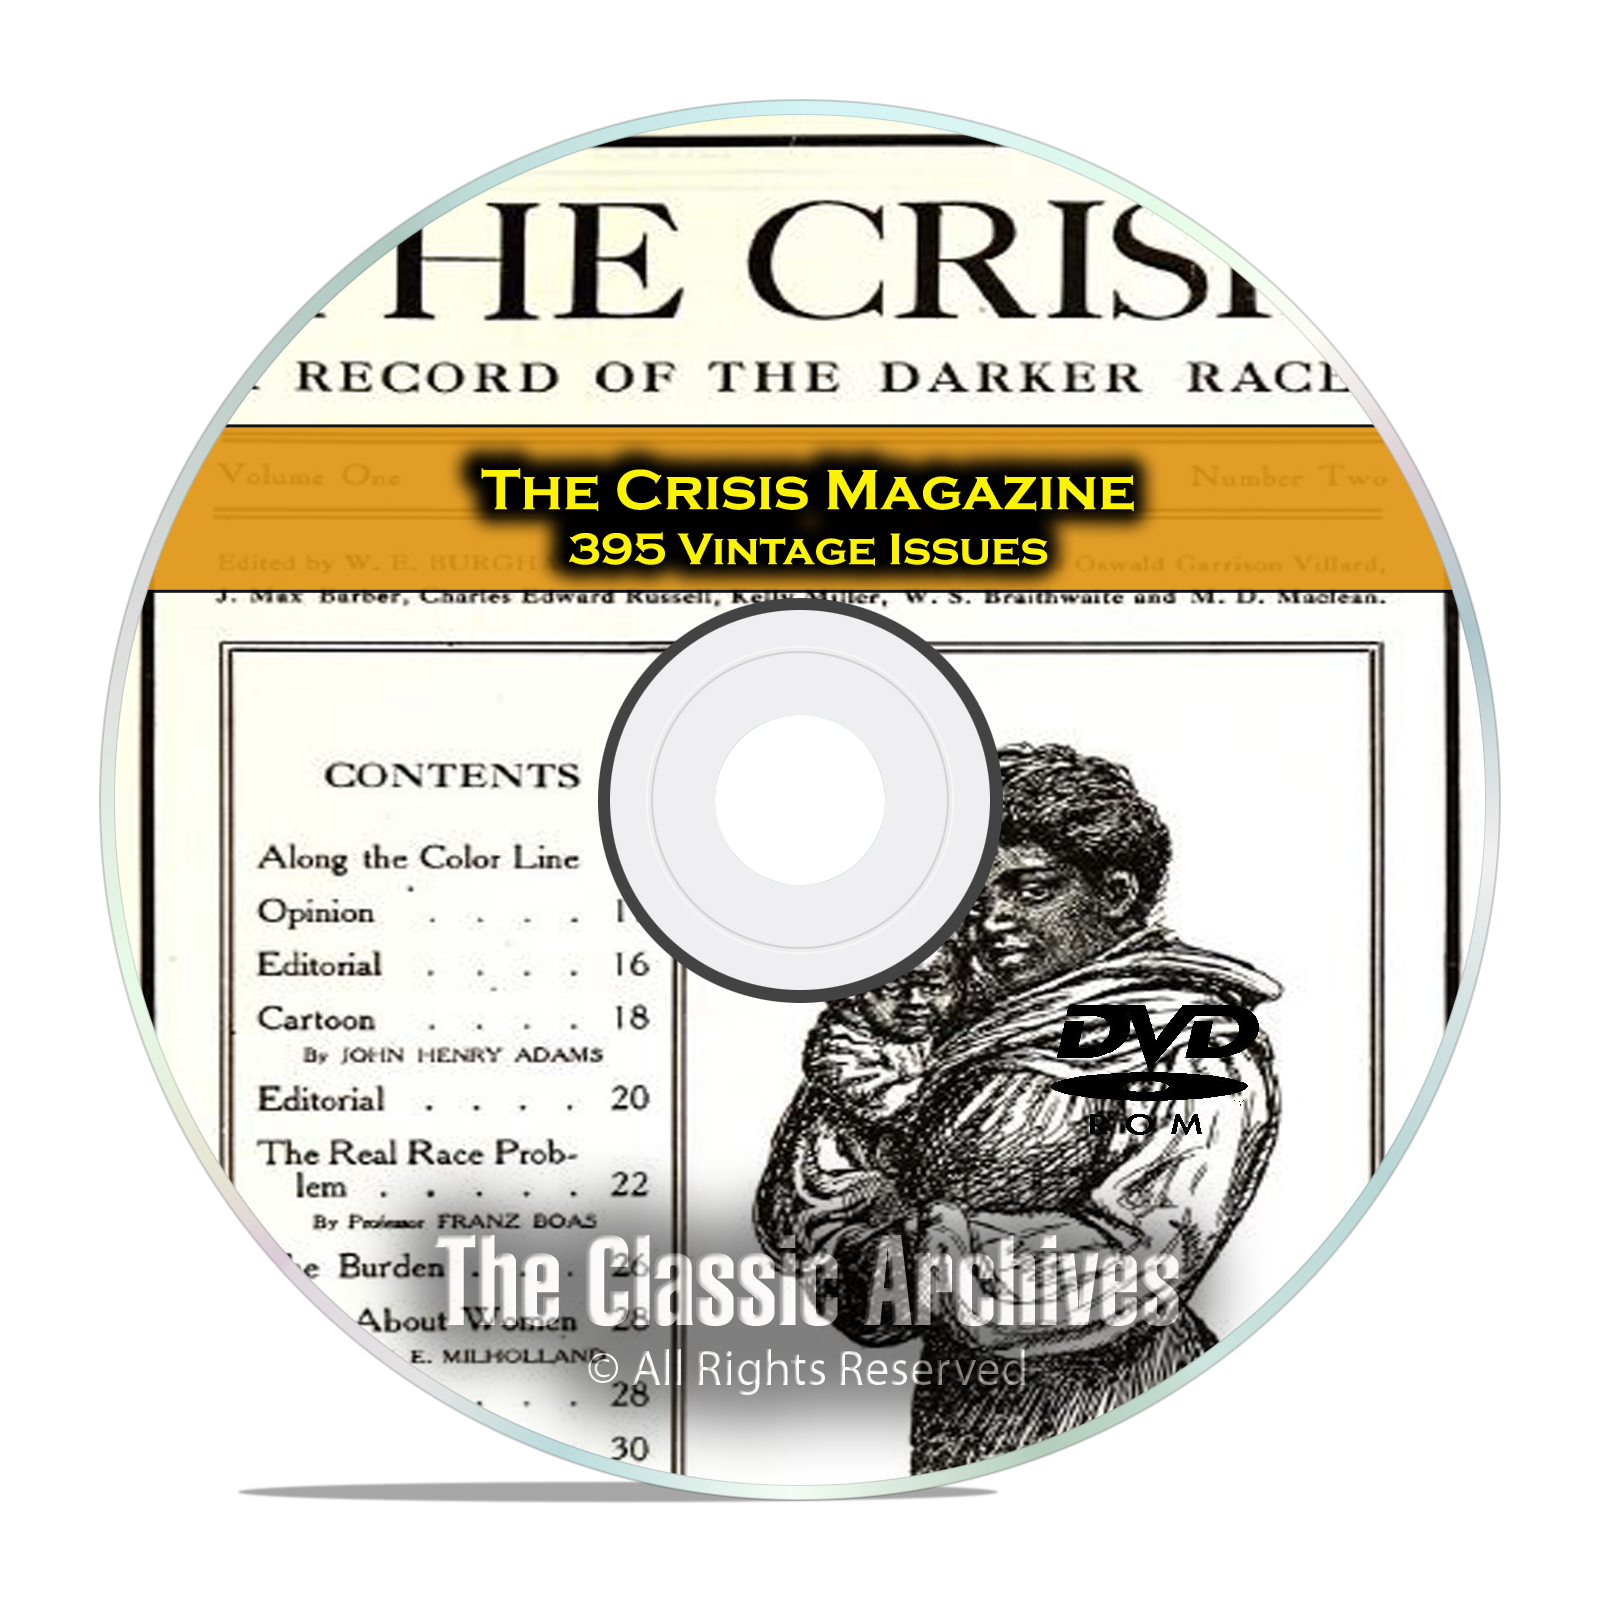 The Crisis Magazine, 395 Vintage Issues 1910-1963 American Civil Rights DVD